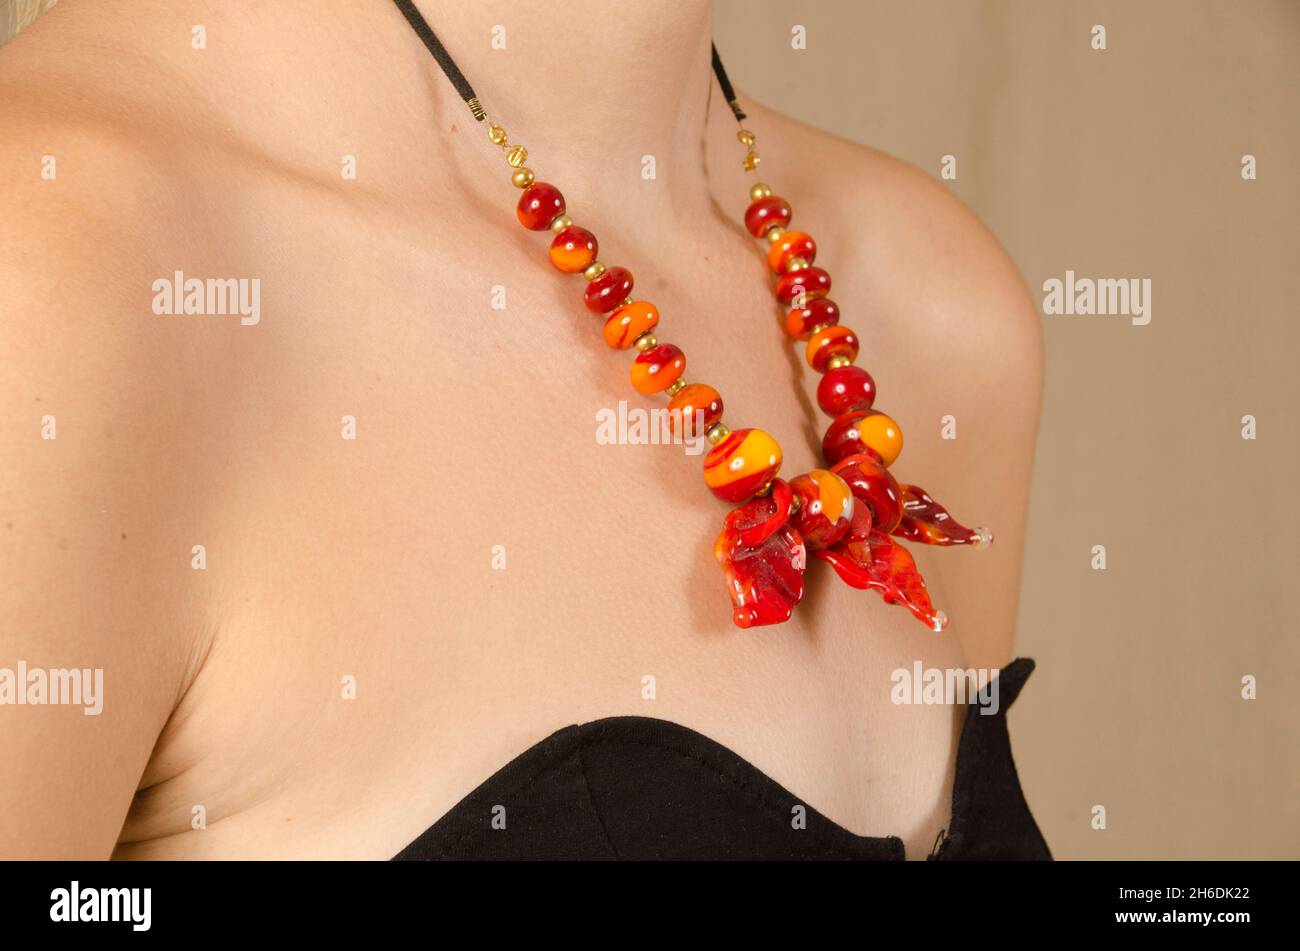 Handmade glass bead necklace around the neck of a female model Stock Photo